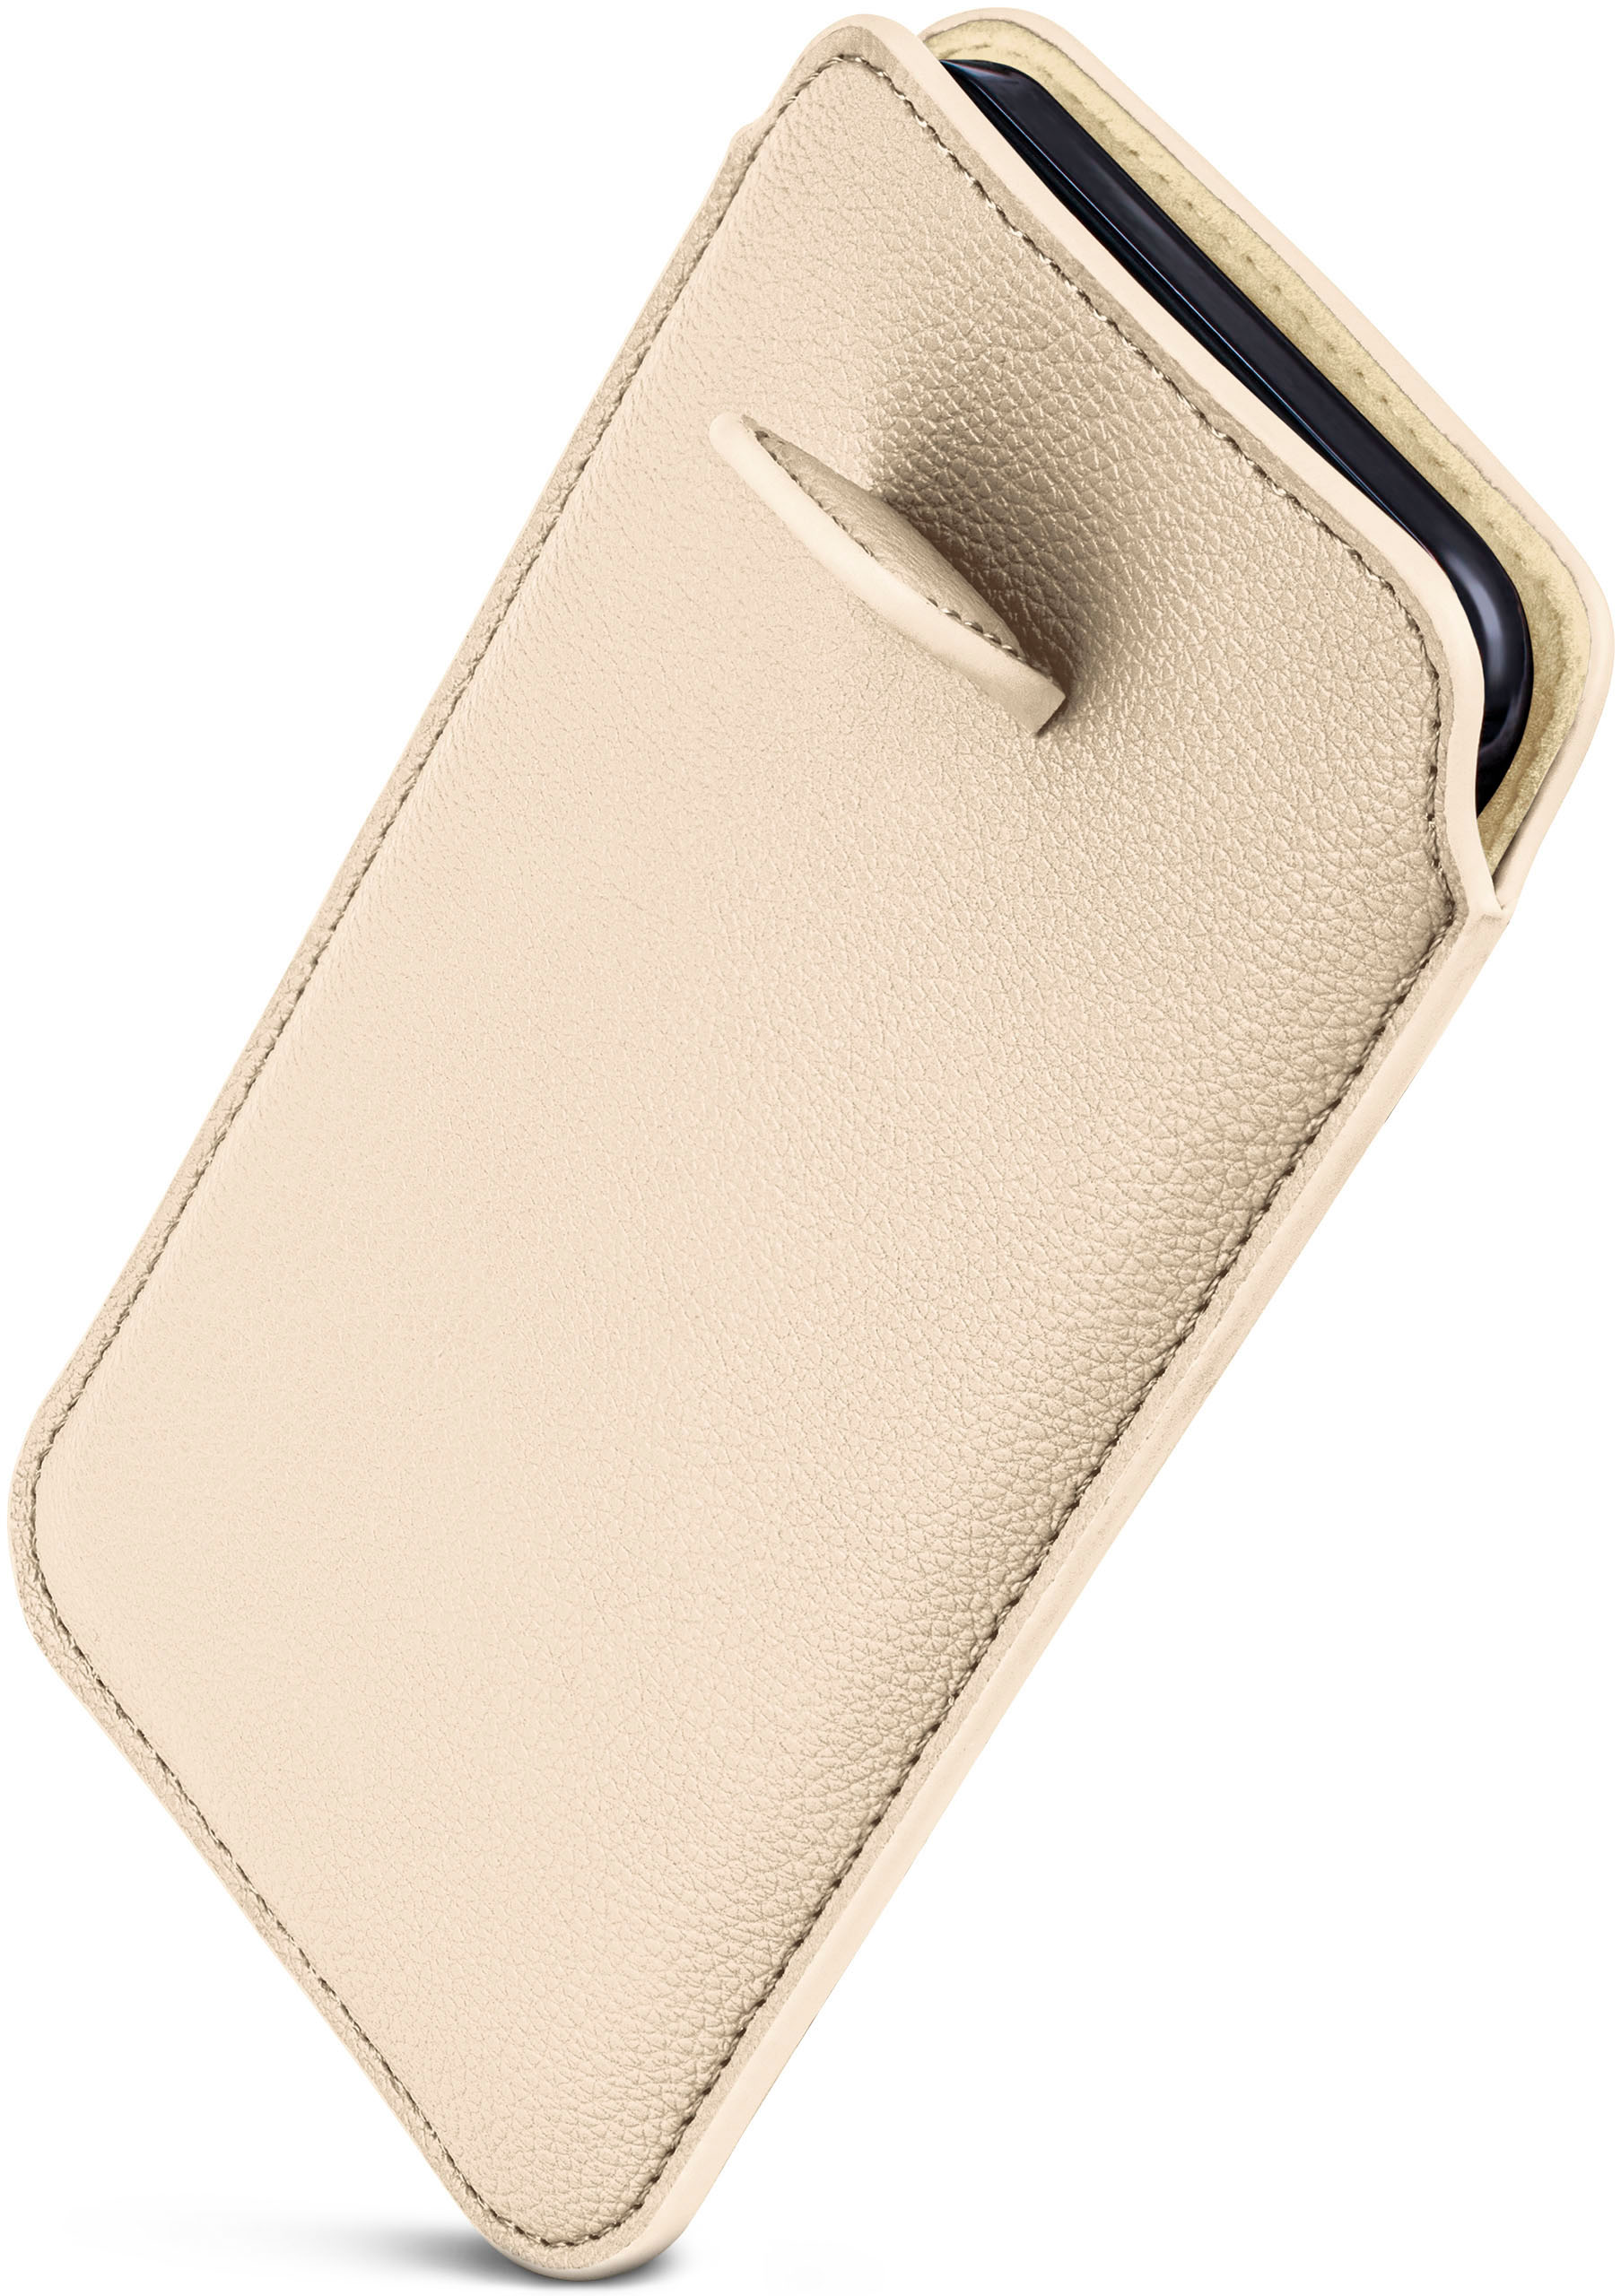 ONEFLOW Einsteckhülle mit Zuglasche, Cover, Compact, Xperia Sony, Creme Full Z3